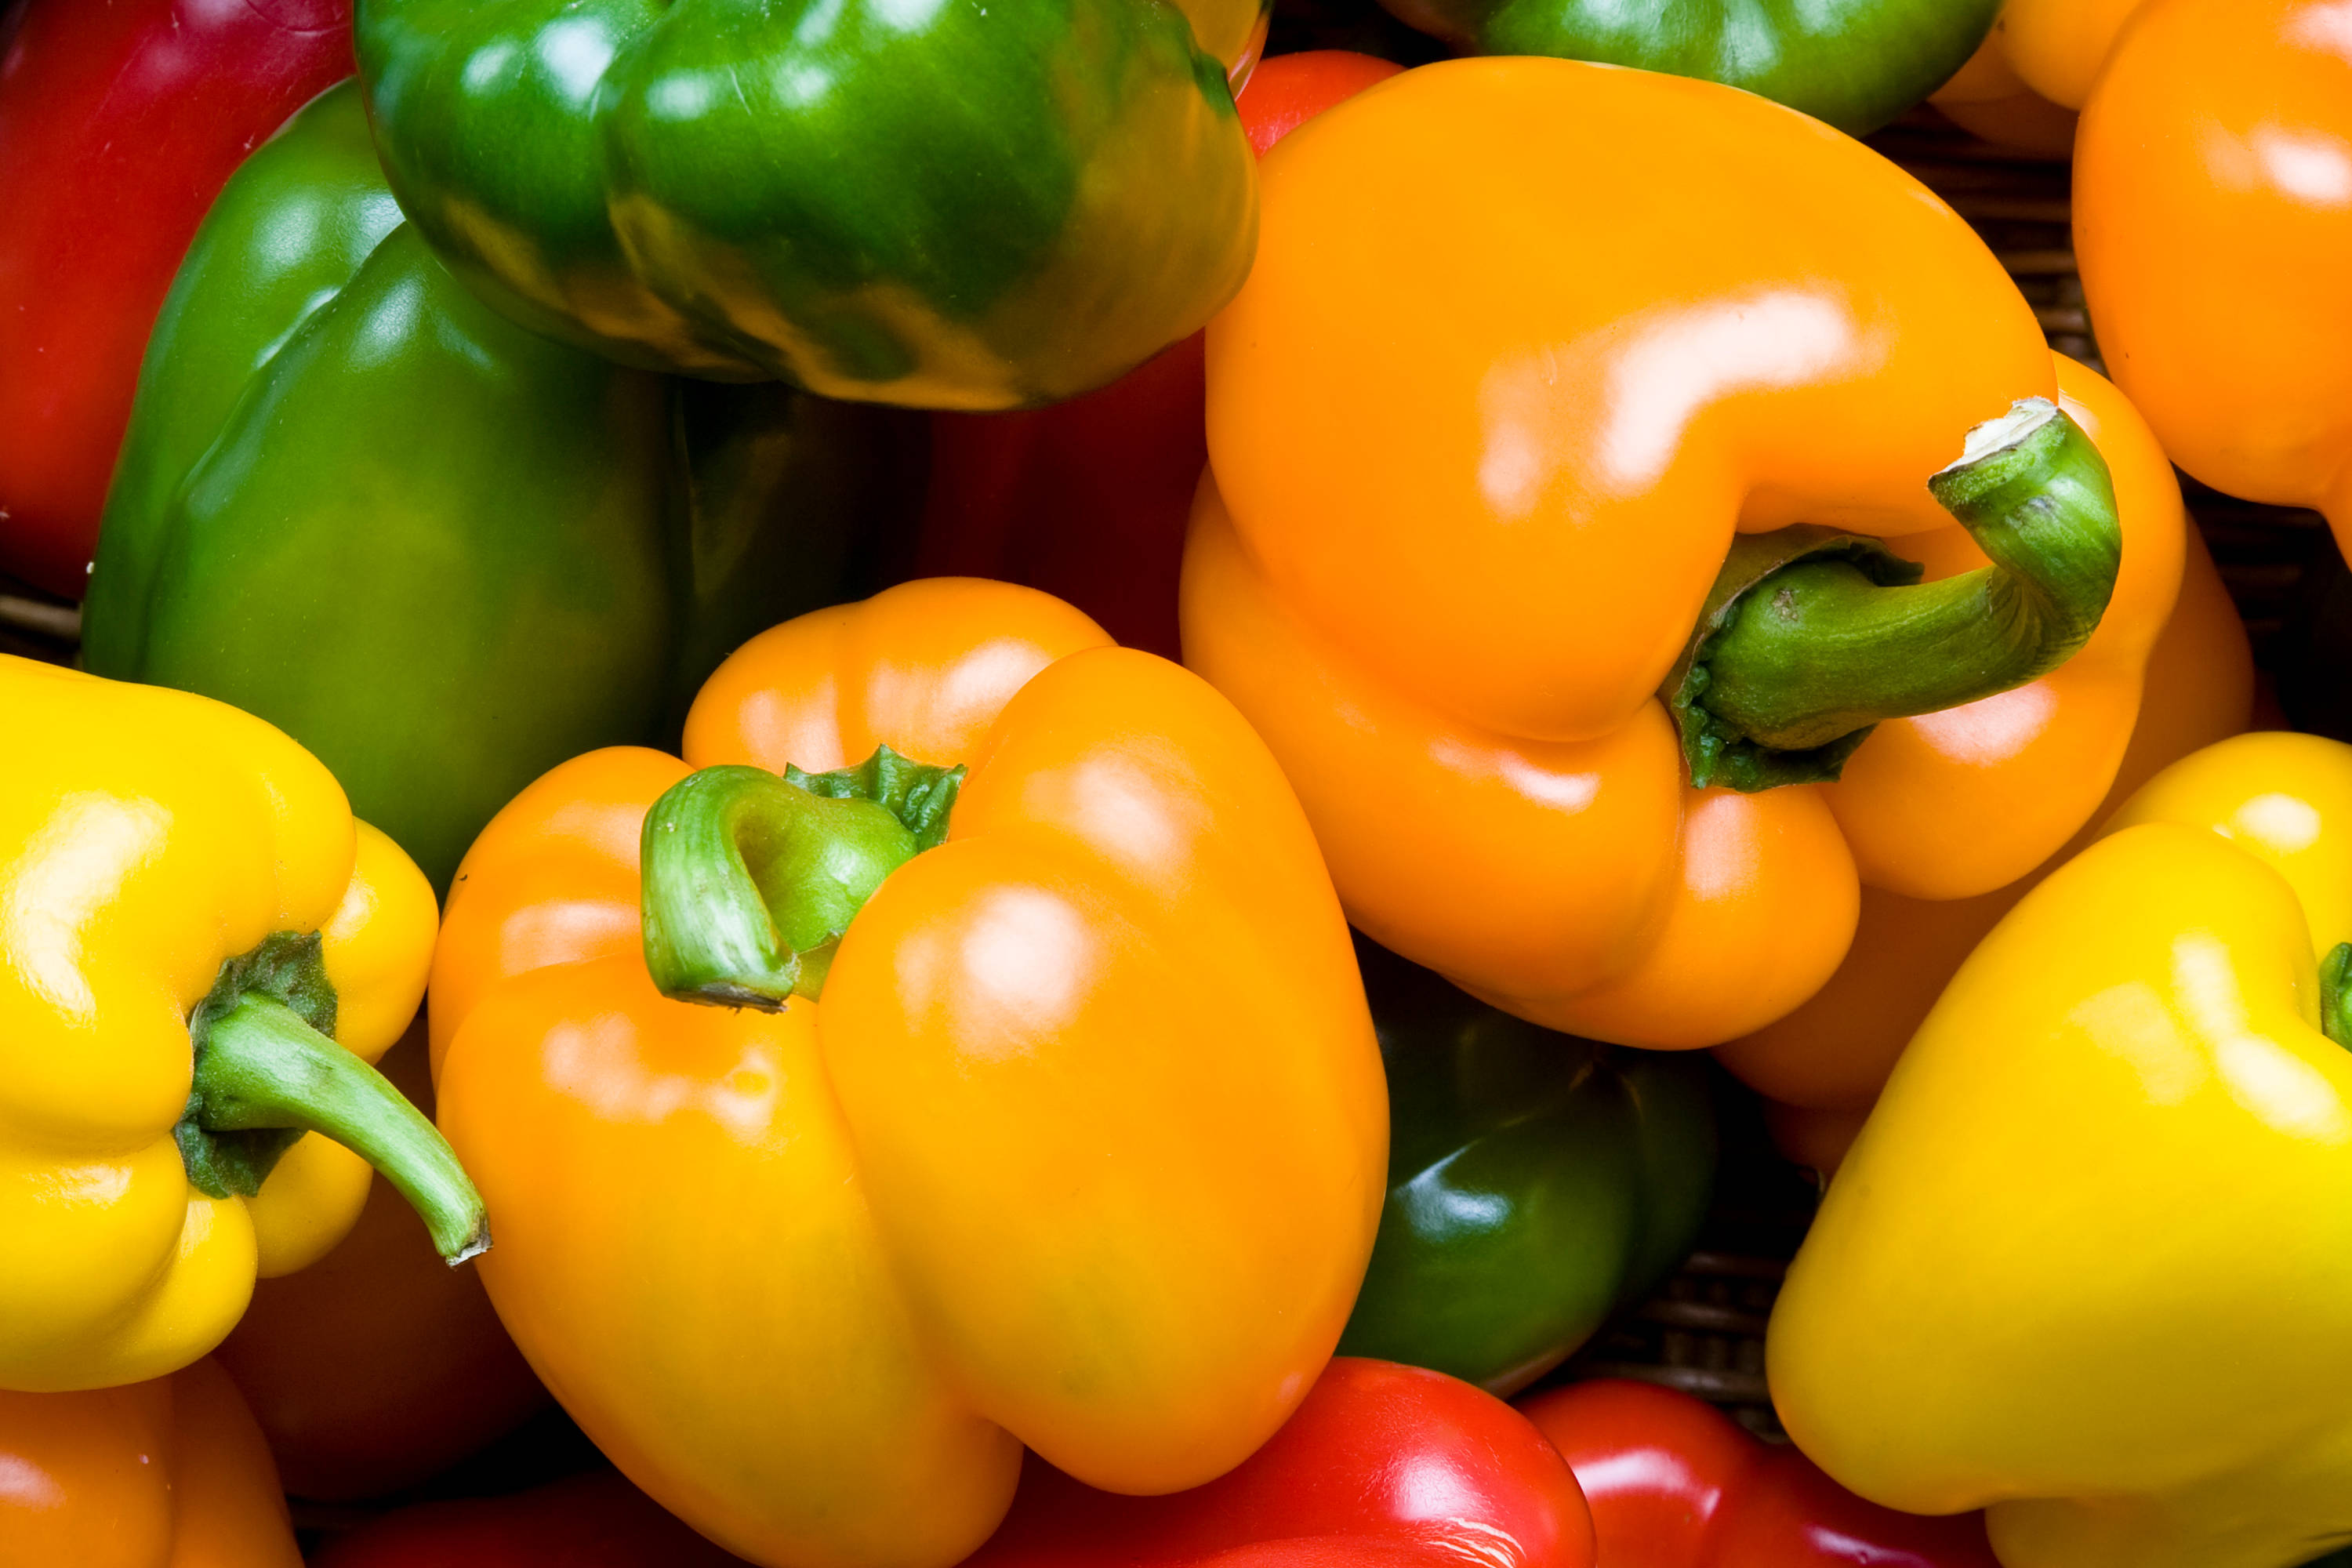 Red, green, and yellow capsicums. Photo: archives / iStock.